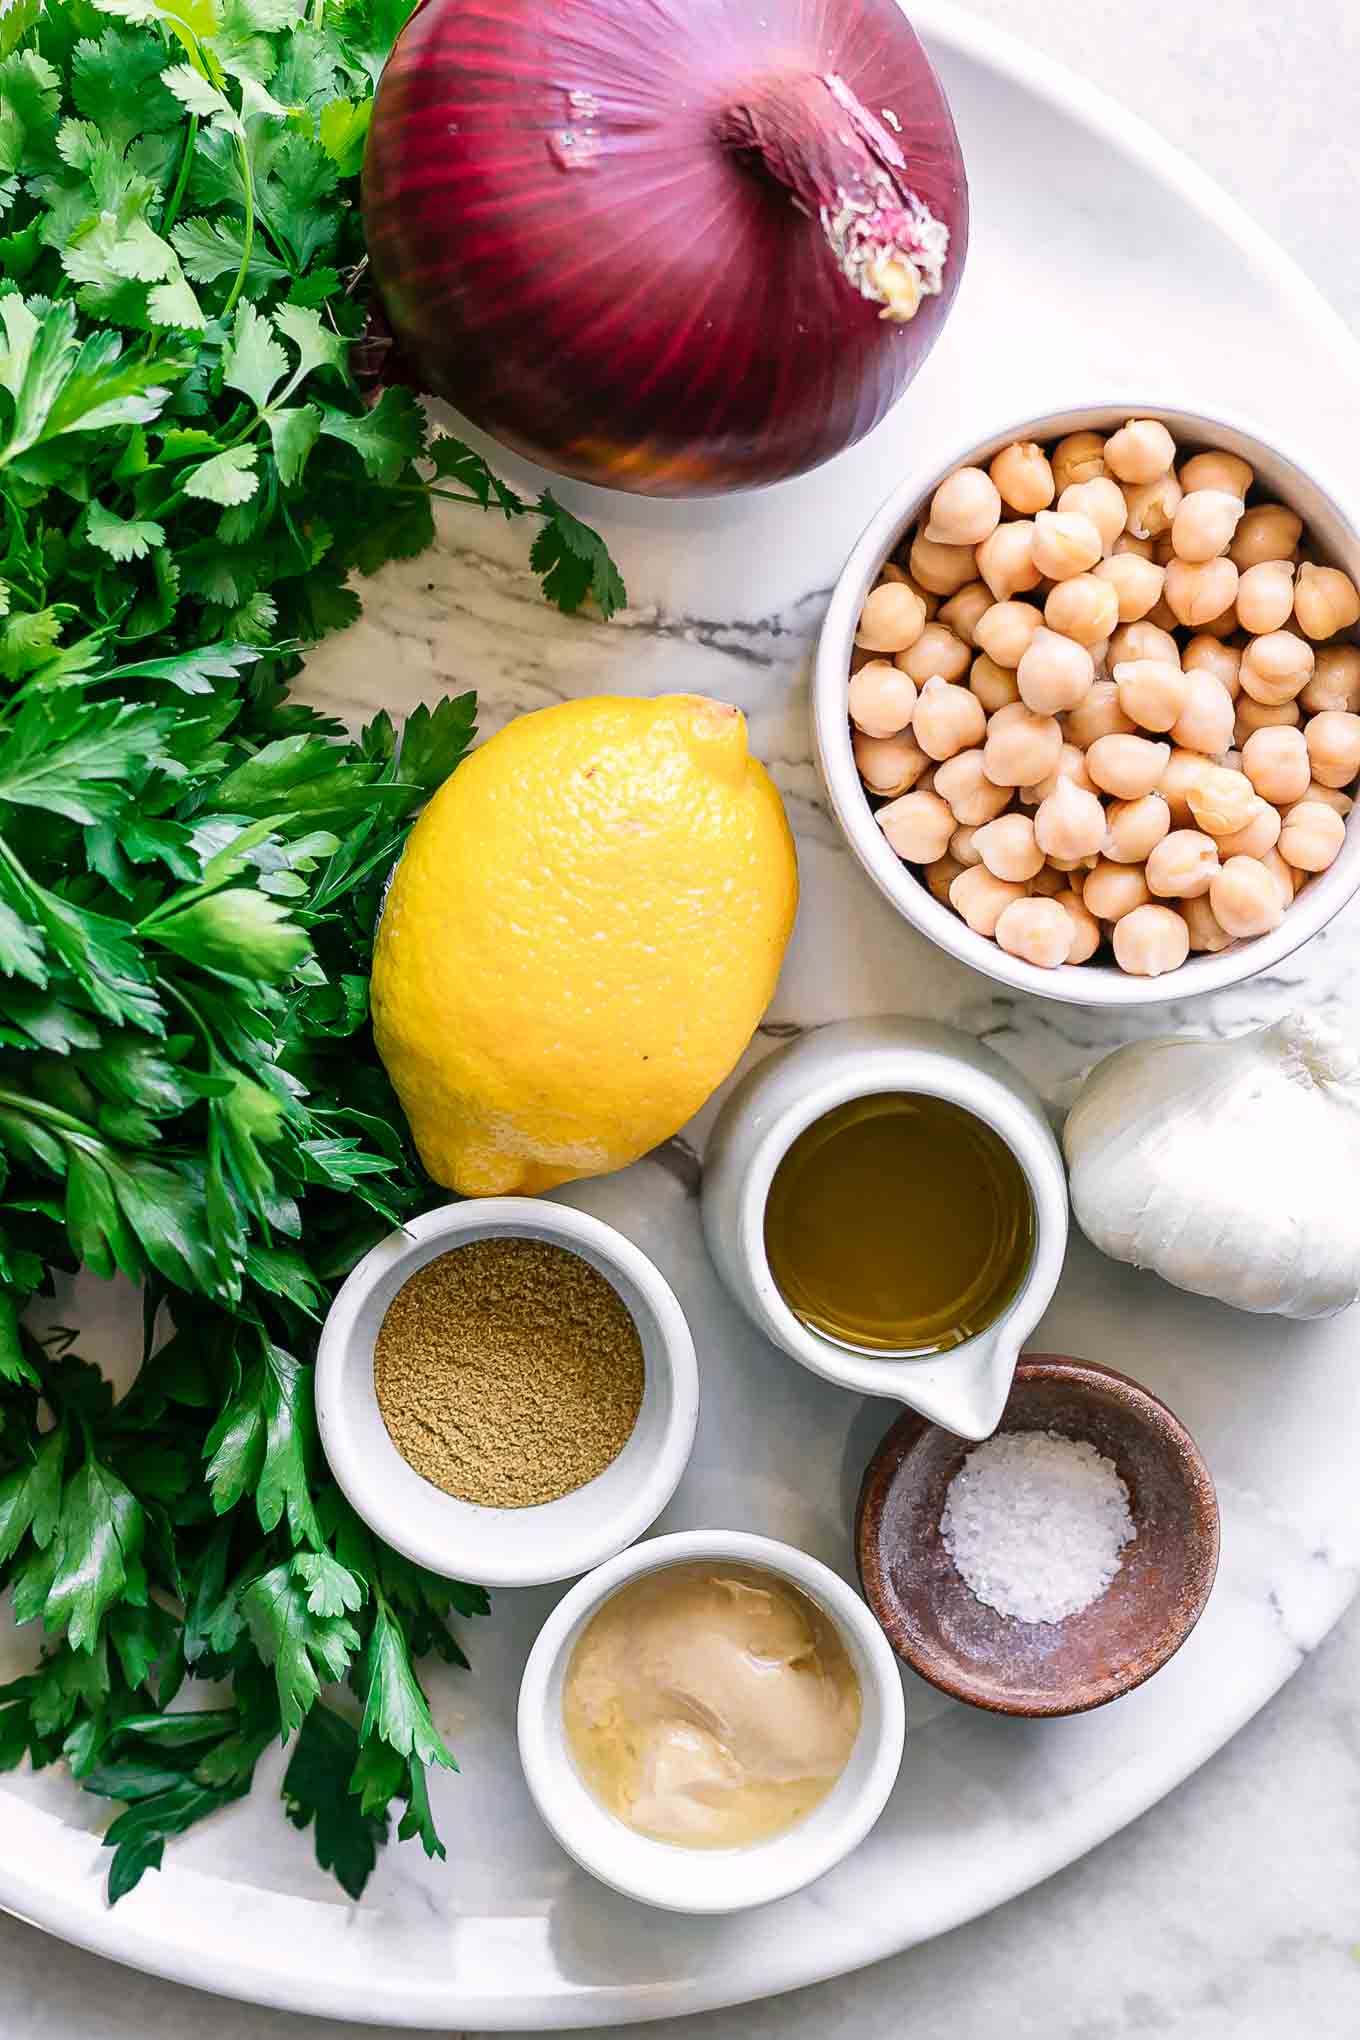 bowls of chickpeas, onion, lemon, spices, seasonings, and fresh herbs for falafel on a white table